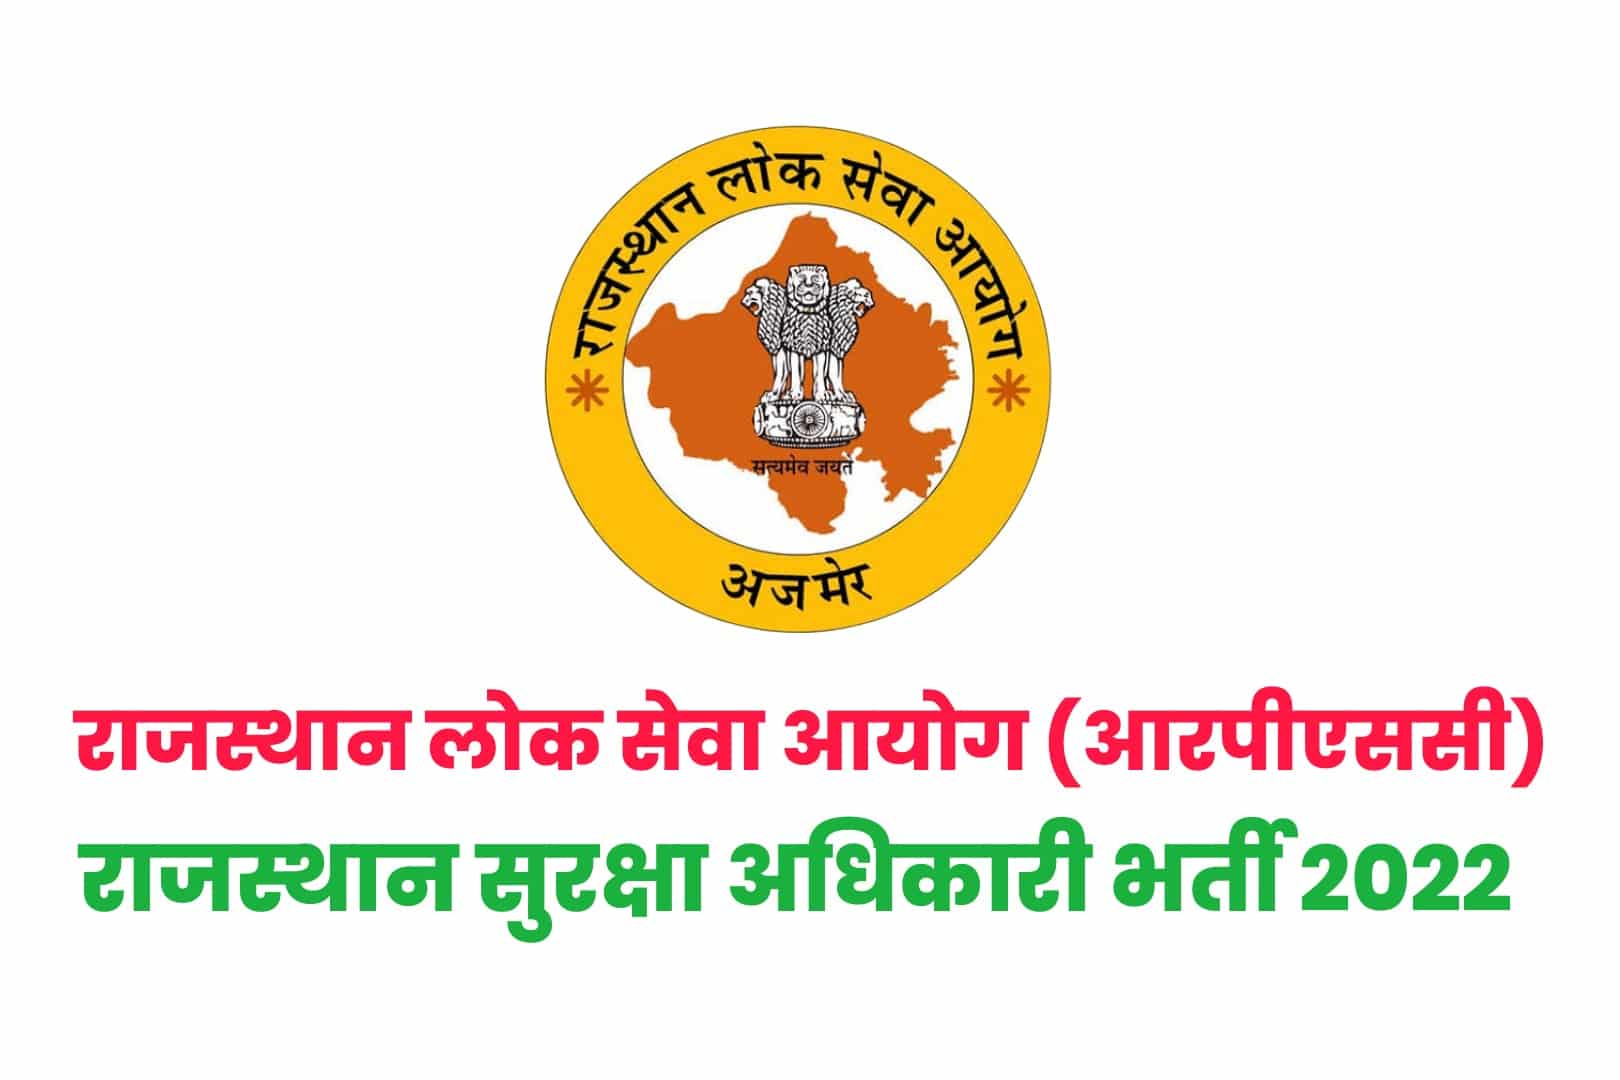 RPSC Protection Officer Recruitment 2022